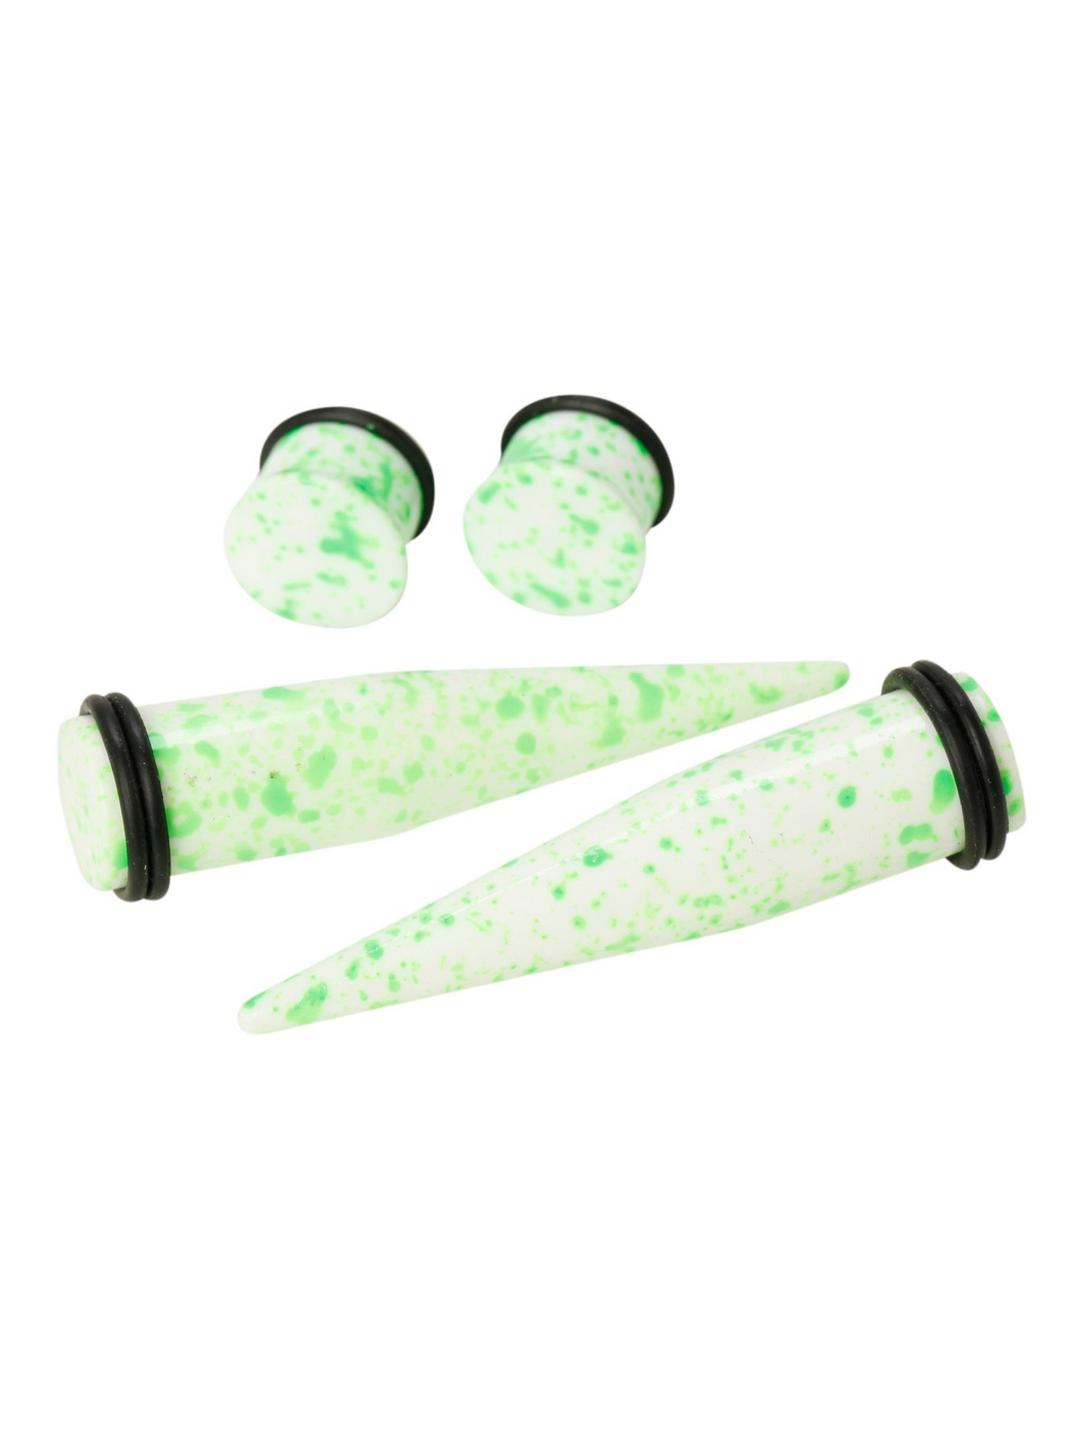 Acrylic White Neon Green Splatter Taper And Plug 4 Pack, , hi-res